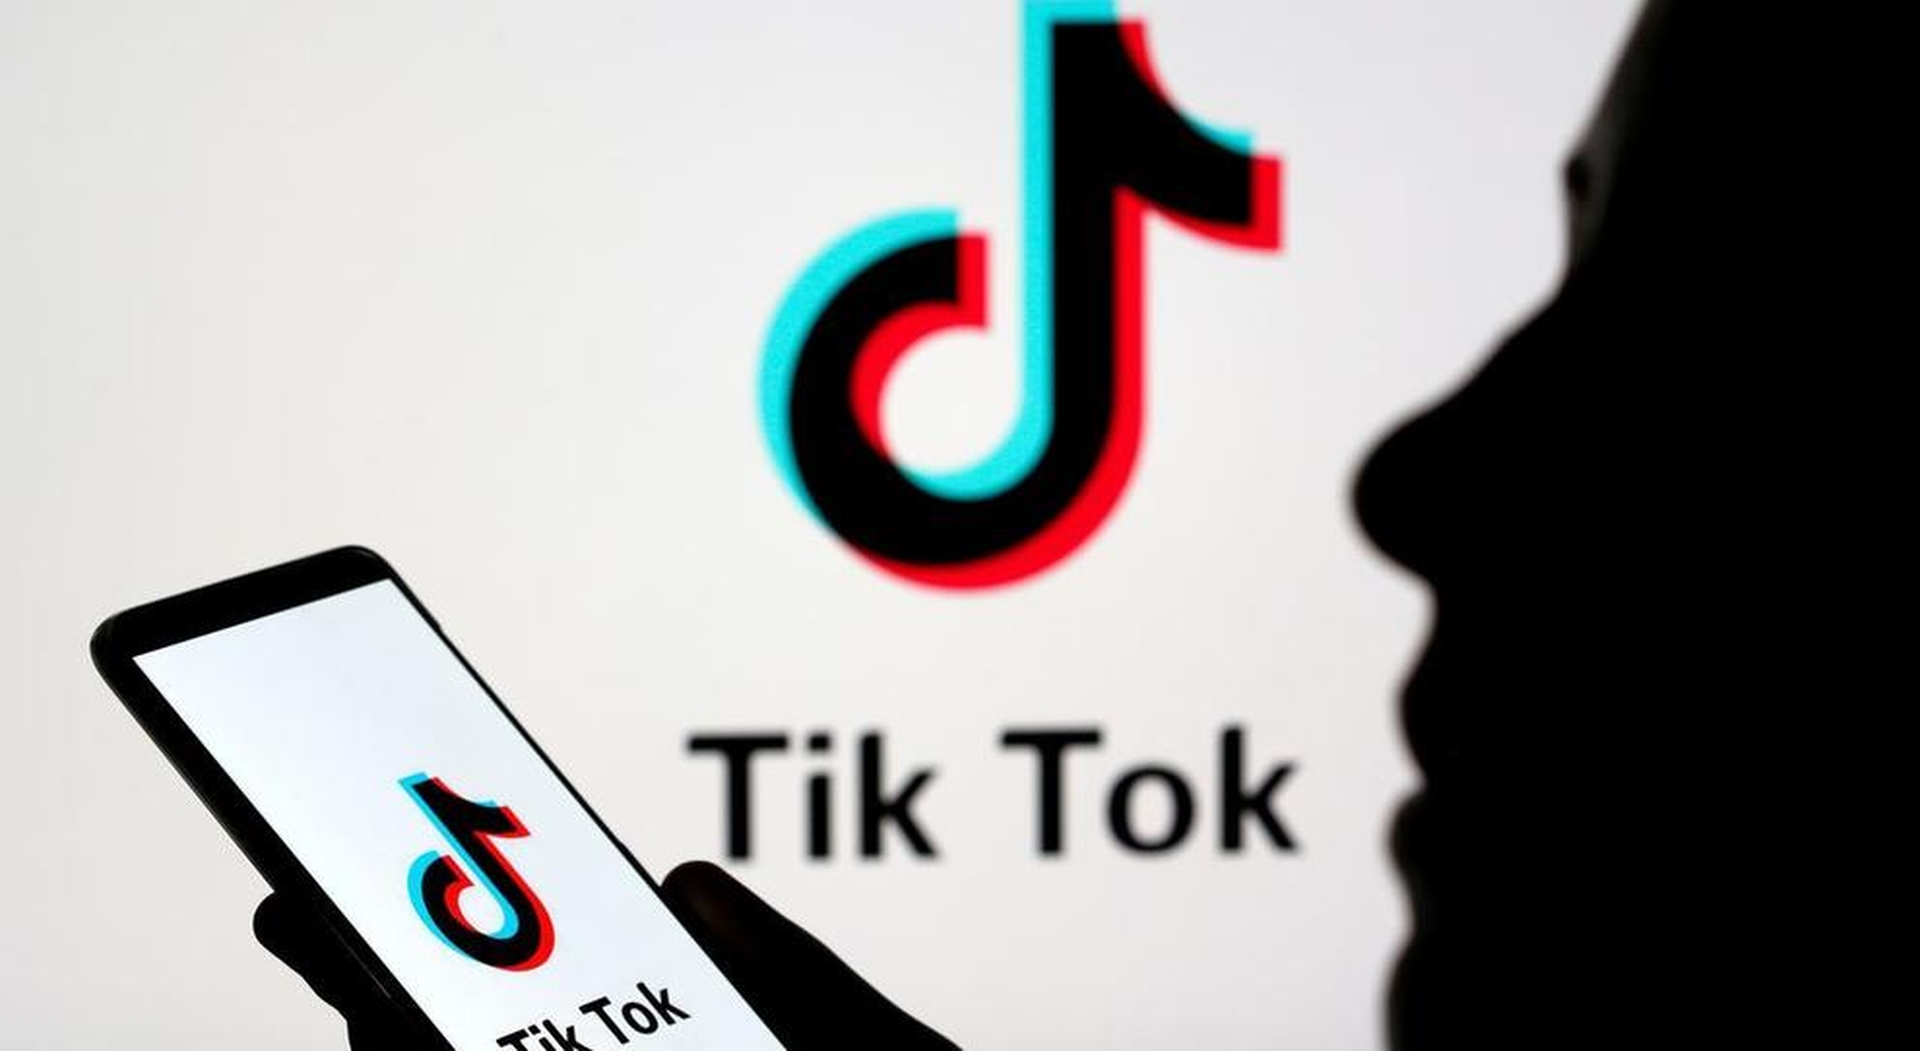 In this article, we are going to be going over how to filter comments on TikTok 2022, so you can rest easy while hateful comments are filtered automatically.